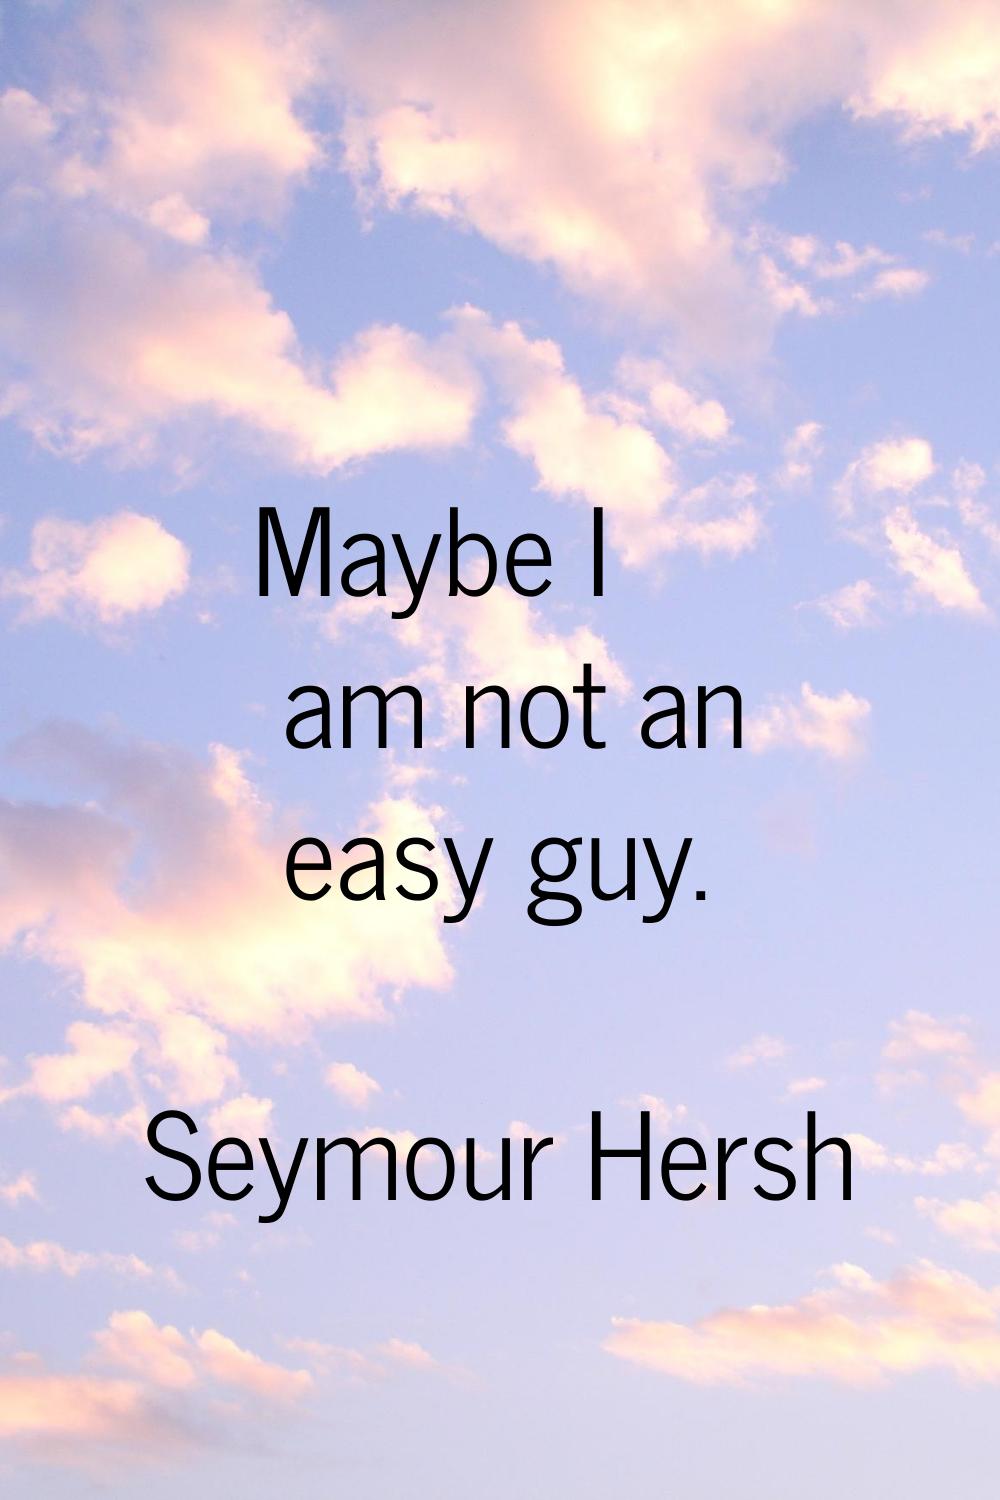 Maybe I am not an easy guy.